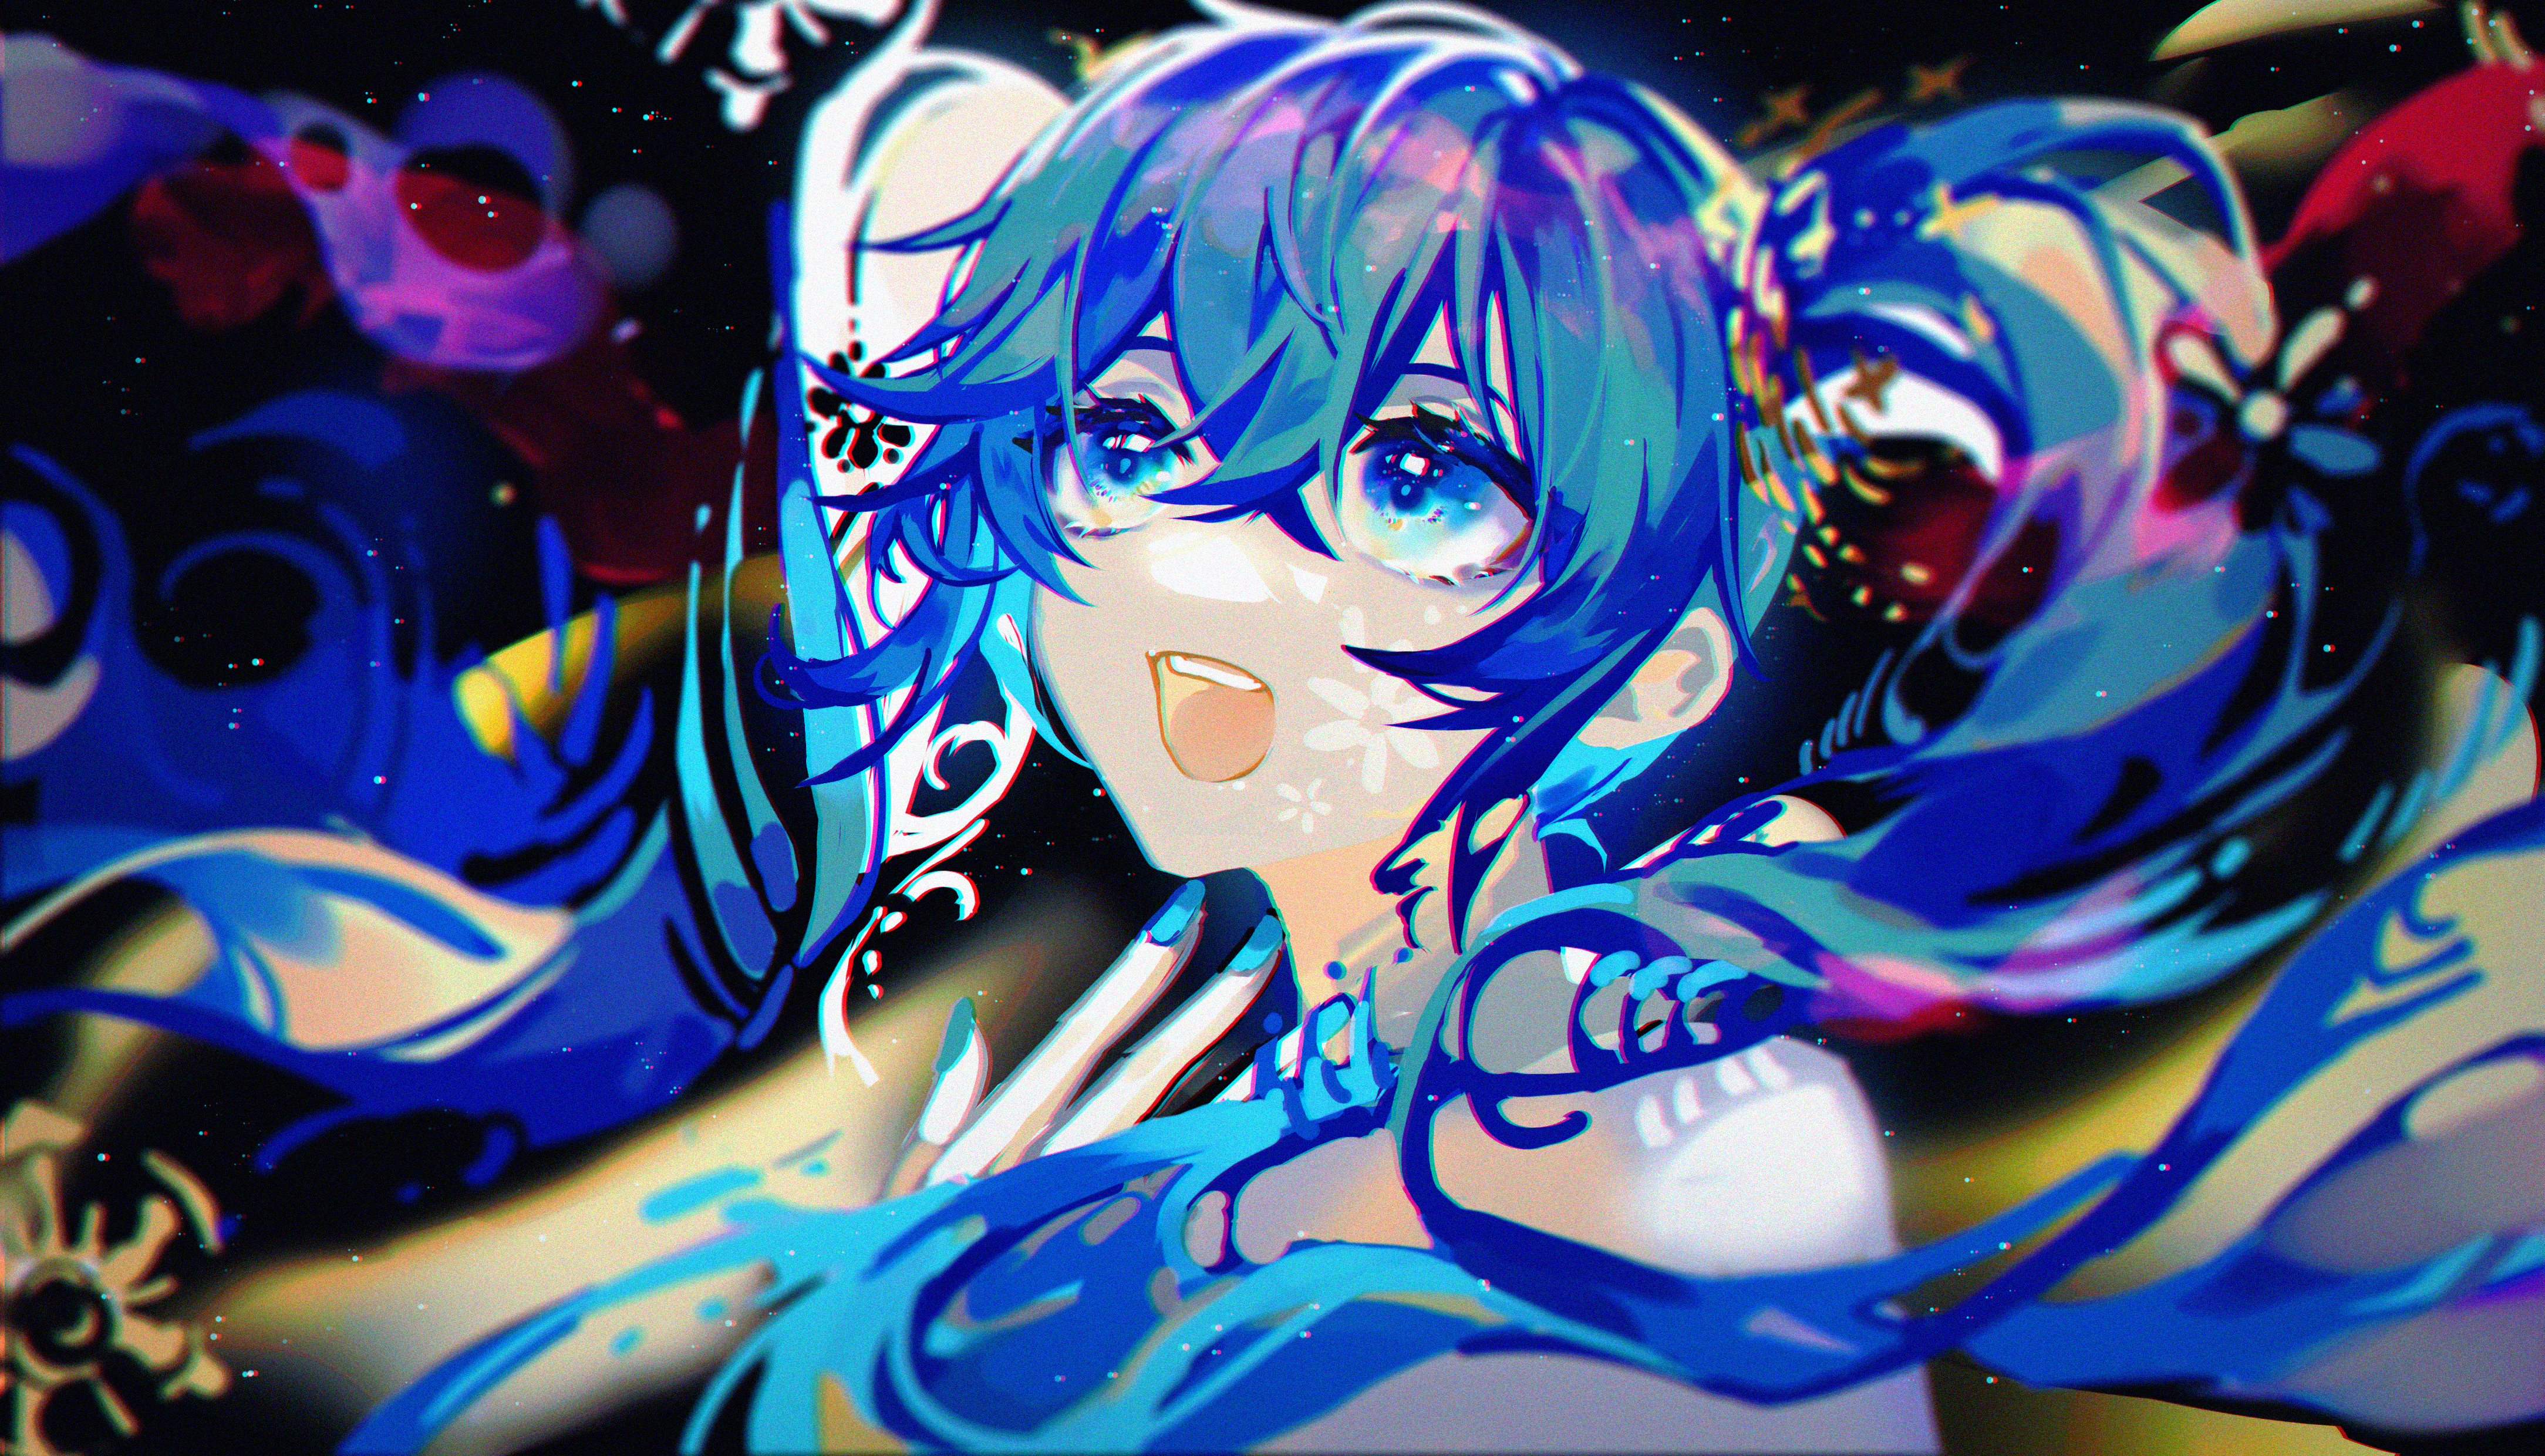 Anime 4335x2480 anime anime girls Hatsune Miku Vocaloid twintails looking up blue hair blue eyes long hair open mouth